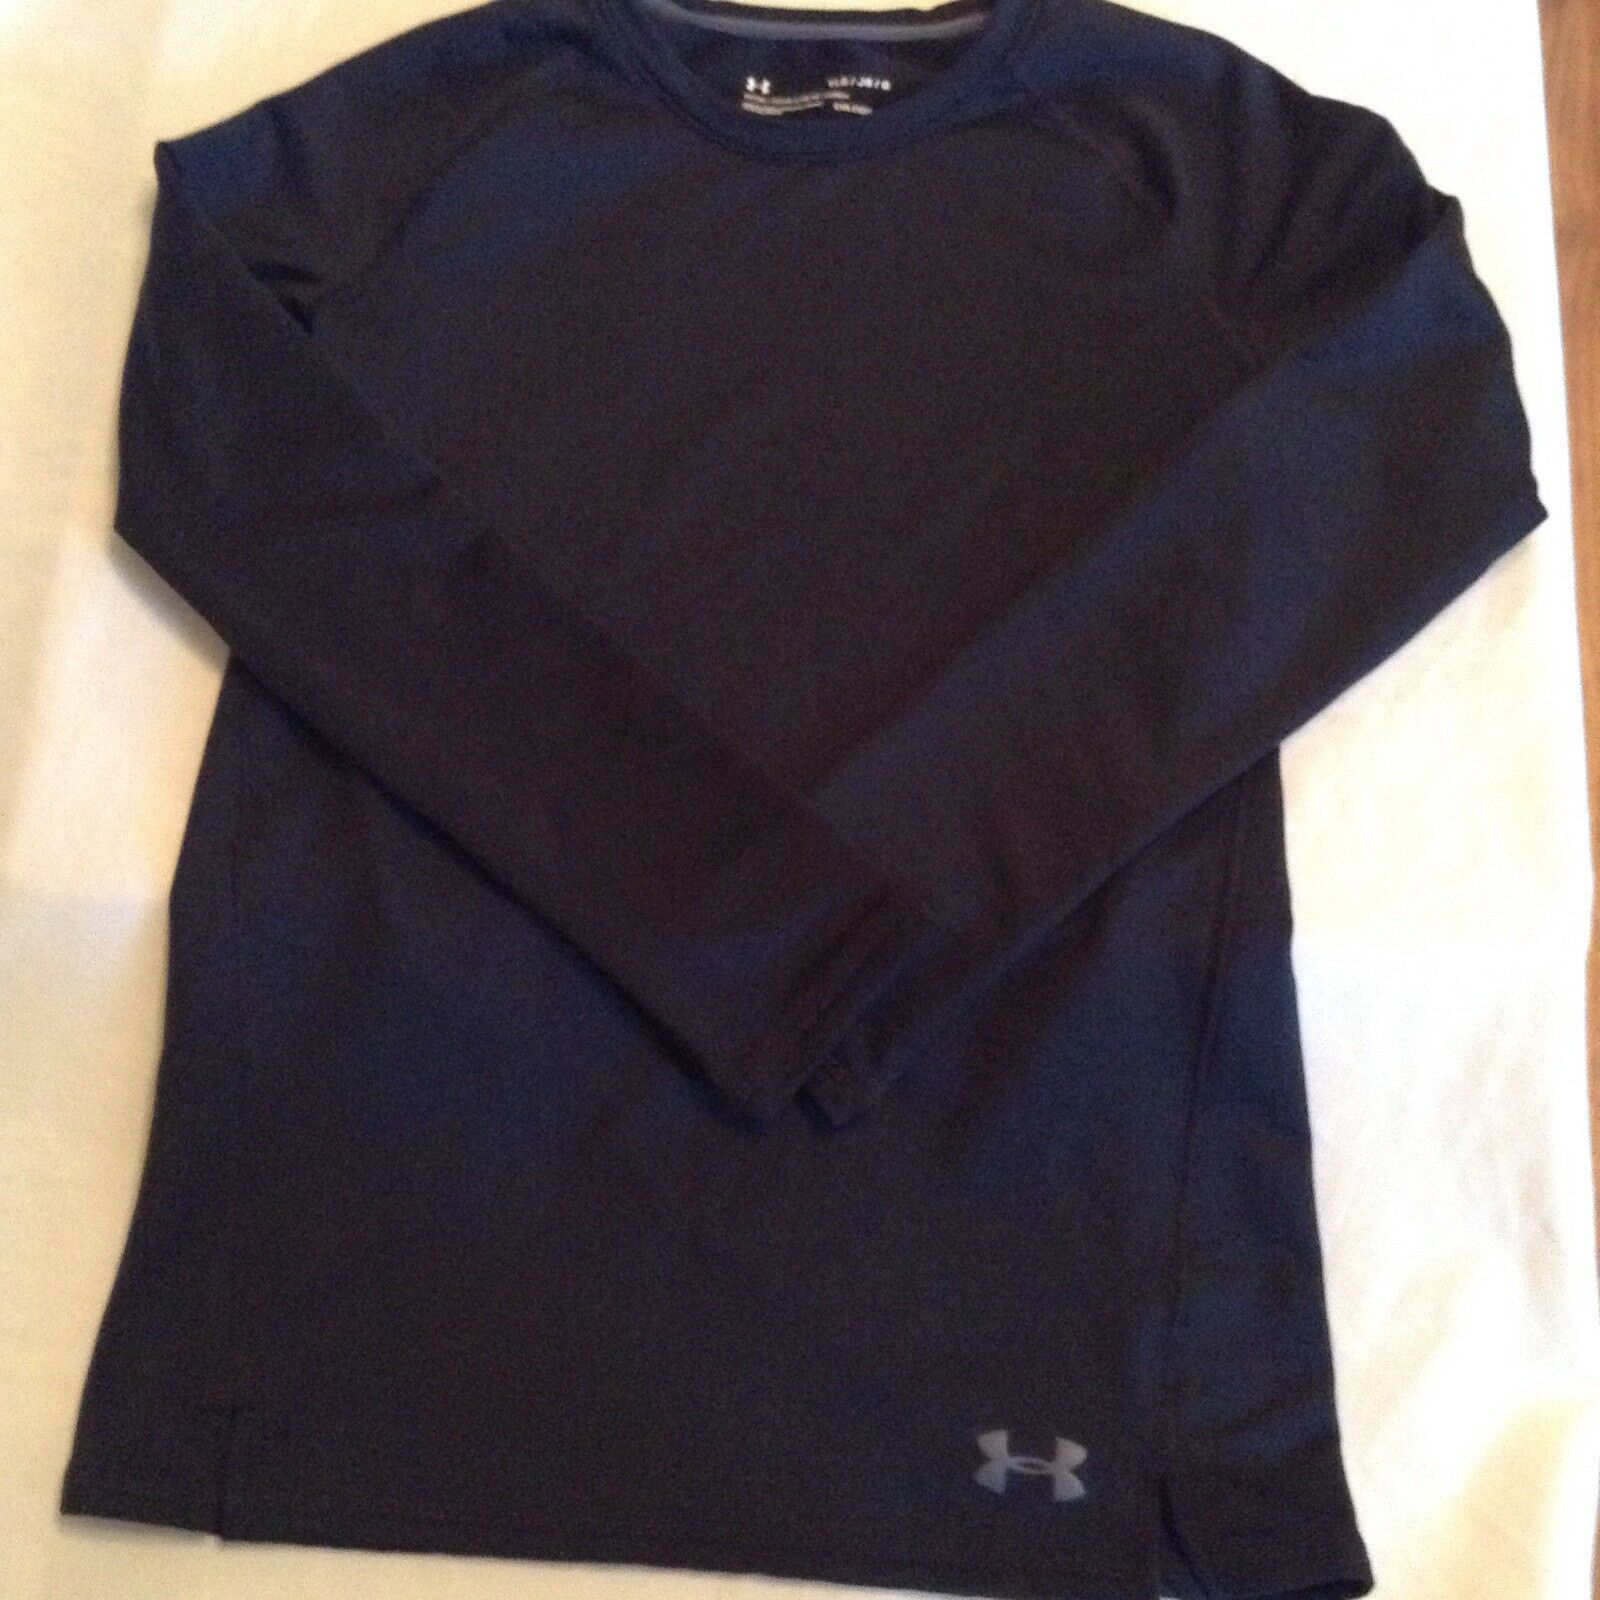 Primary image for Size youth large Under Armour compression shirt cold gear long sleeve black boys